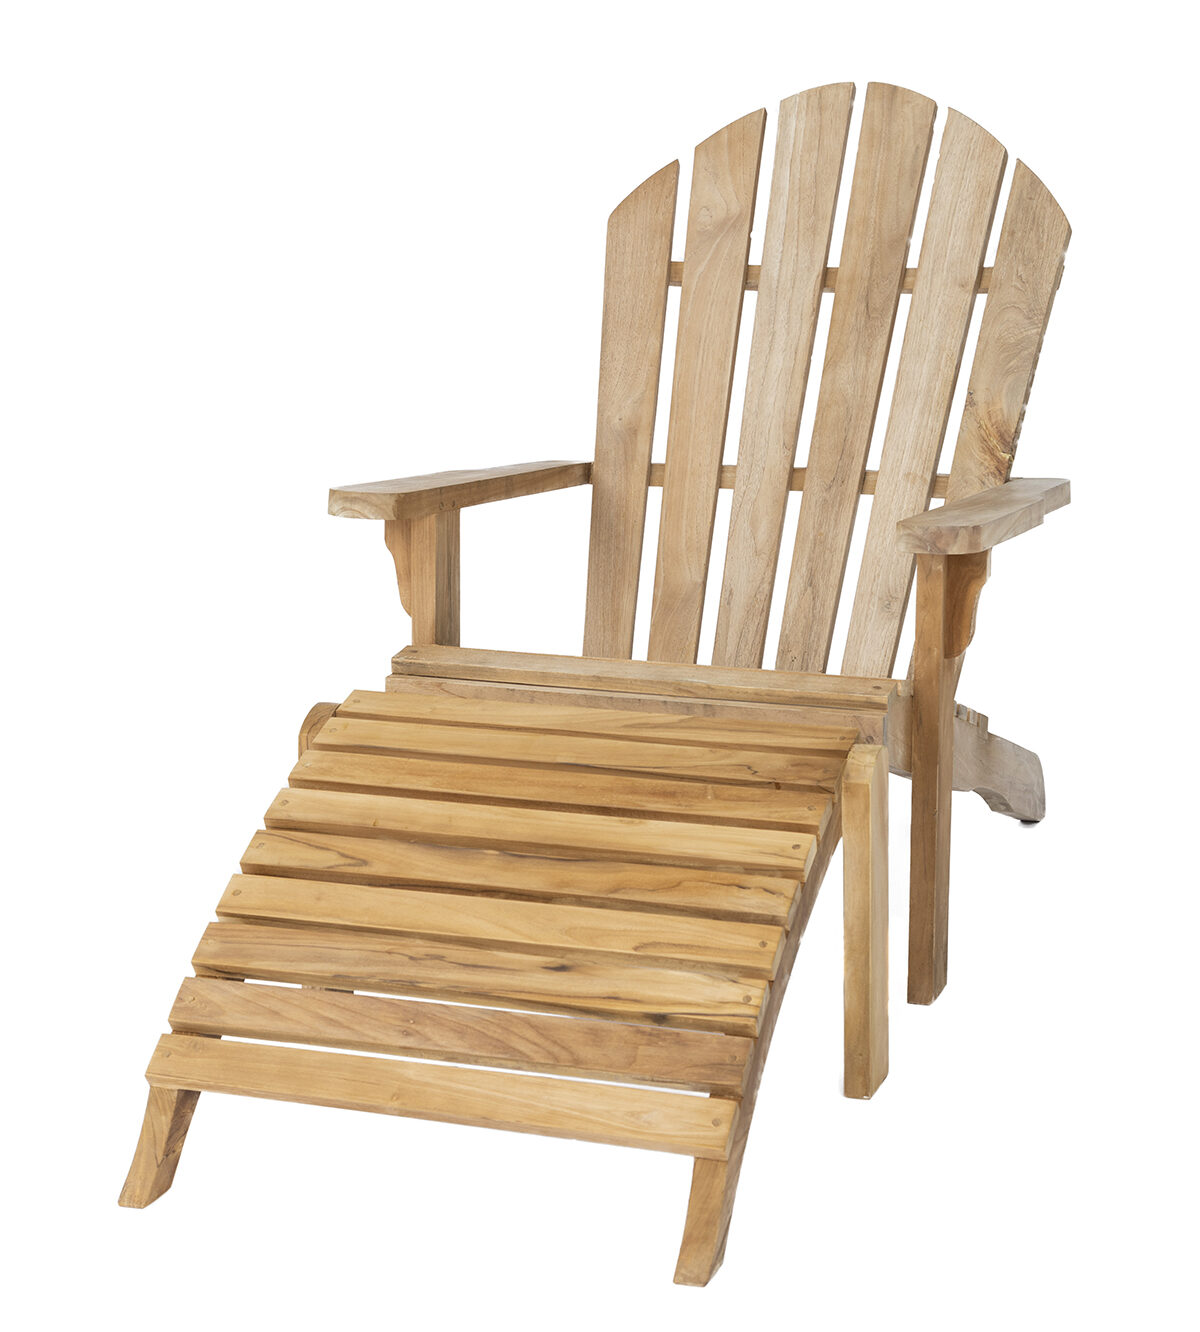 This Adirondack Chair with Stool is made of 100% Grade A Teak and can withstand the outdoor elements. Find your Charleston outdoor furniture at GDC Furniture stores